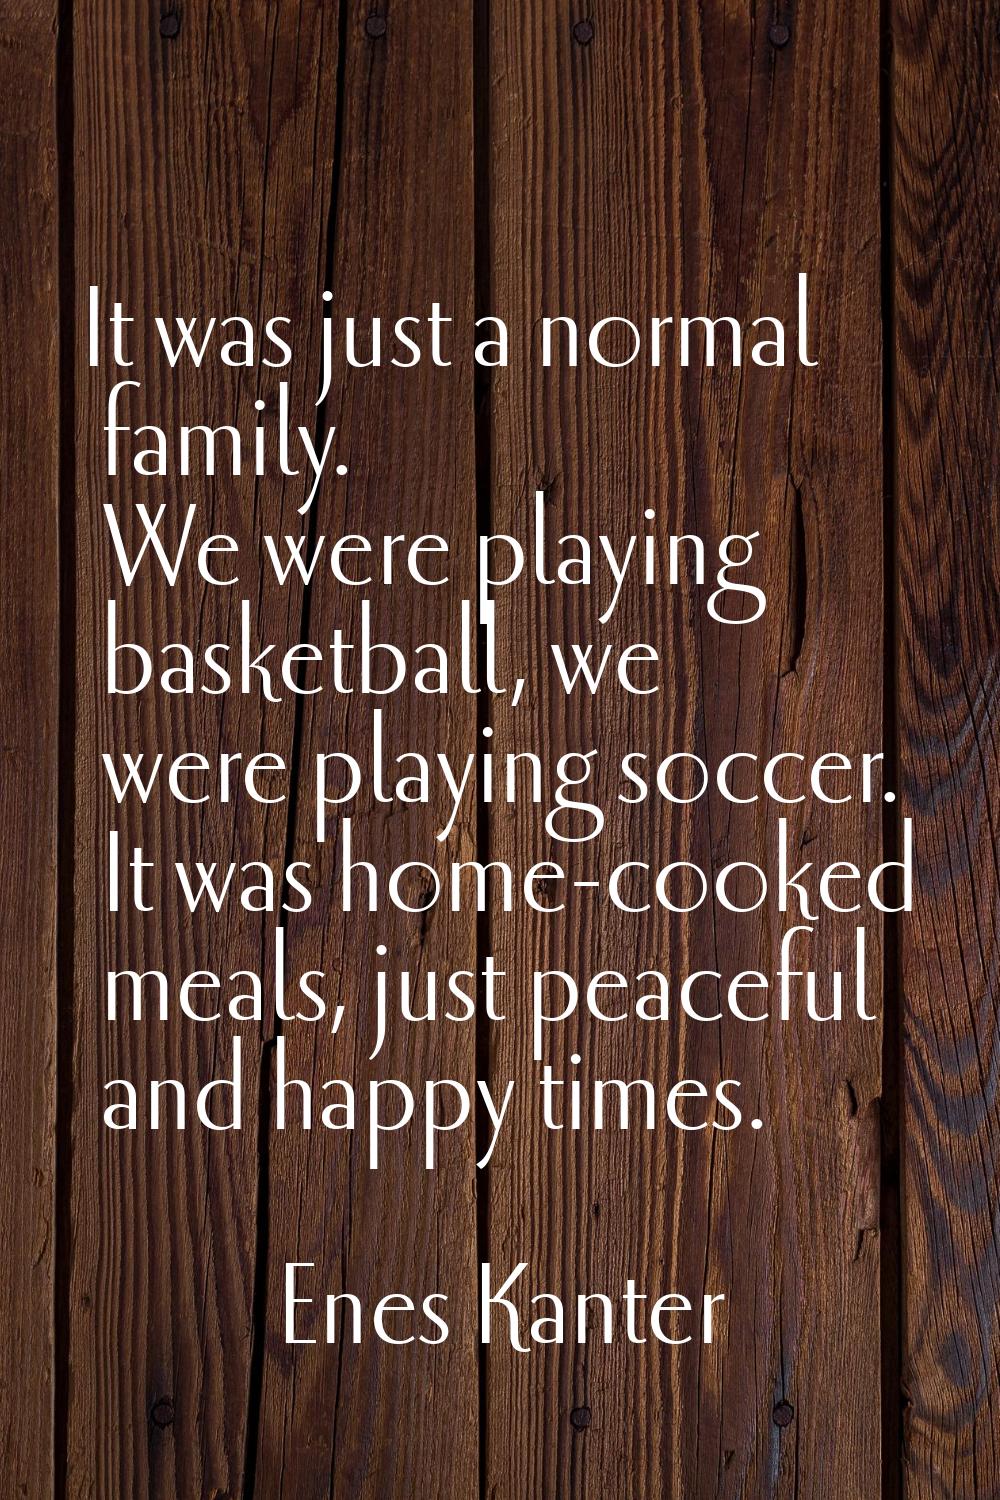 It was just a normal family. We were playing basketball, we were playing soccer. It was home-cooked